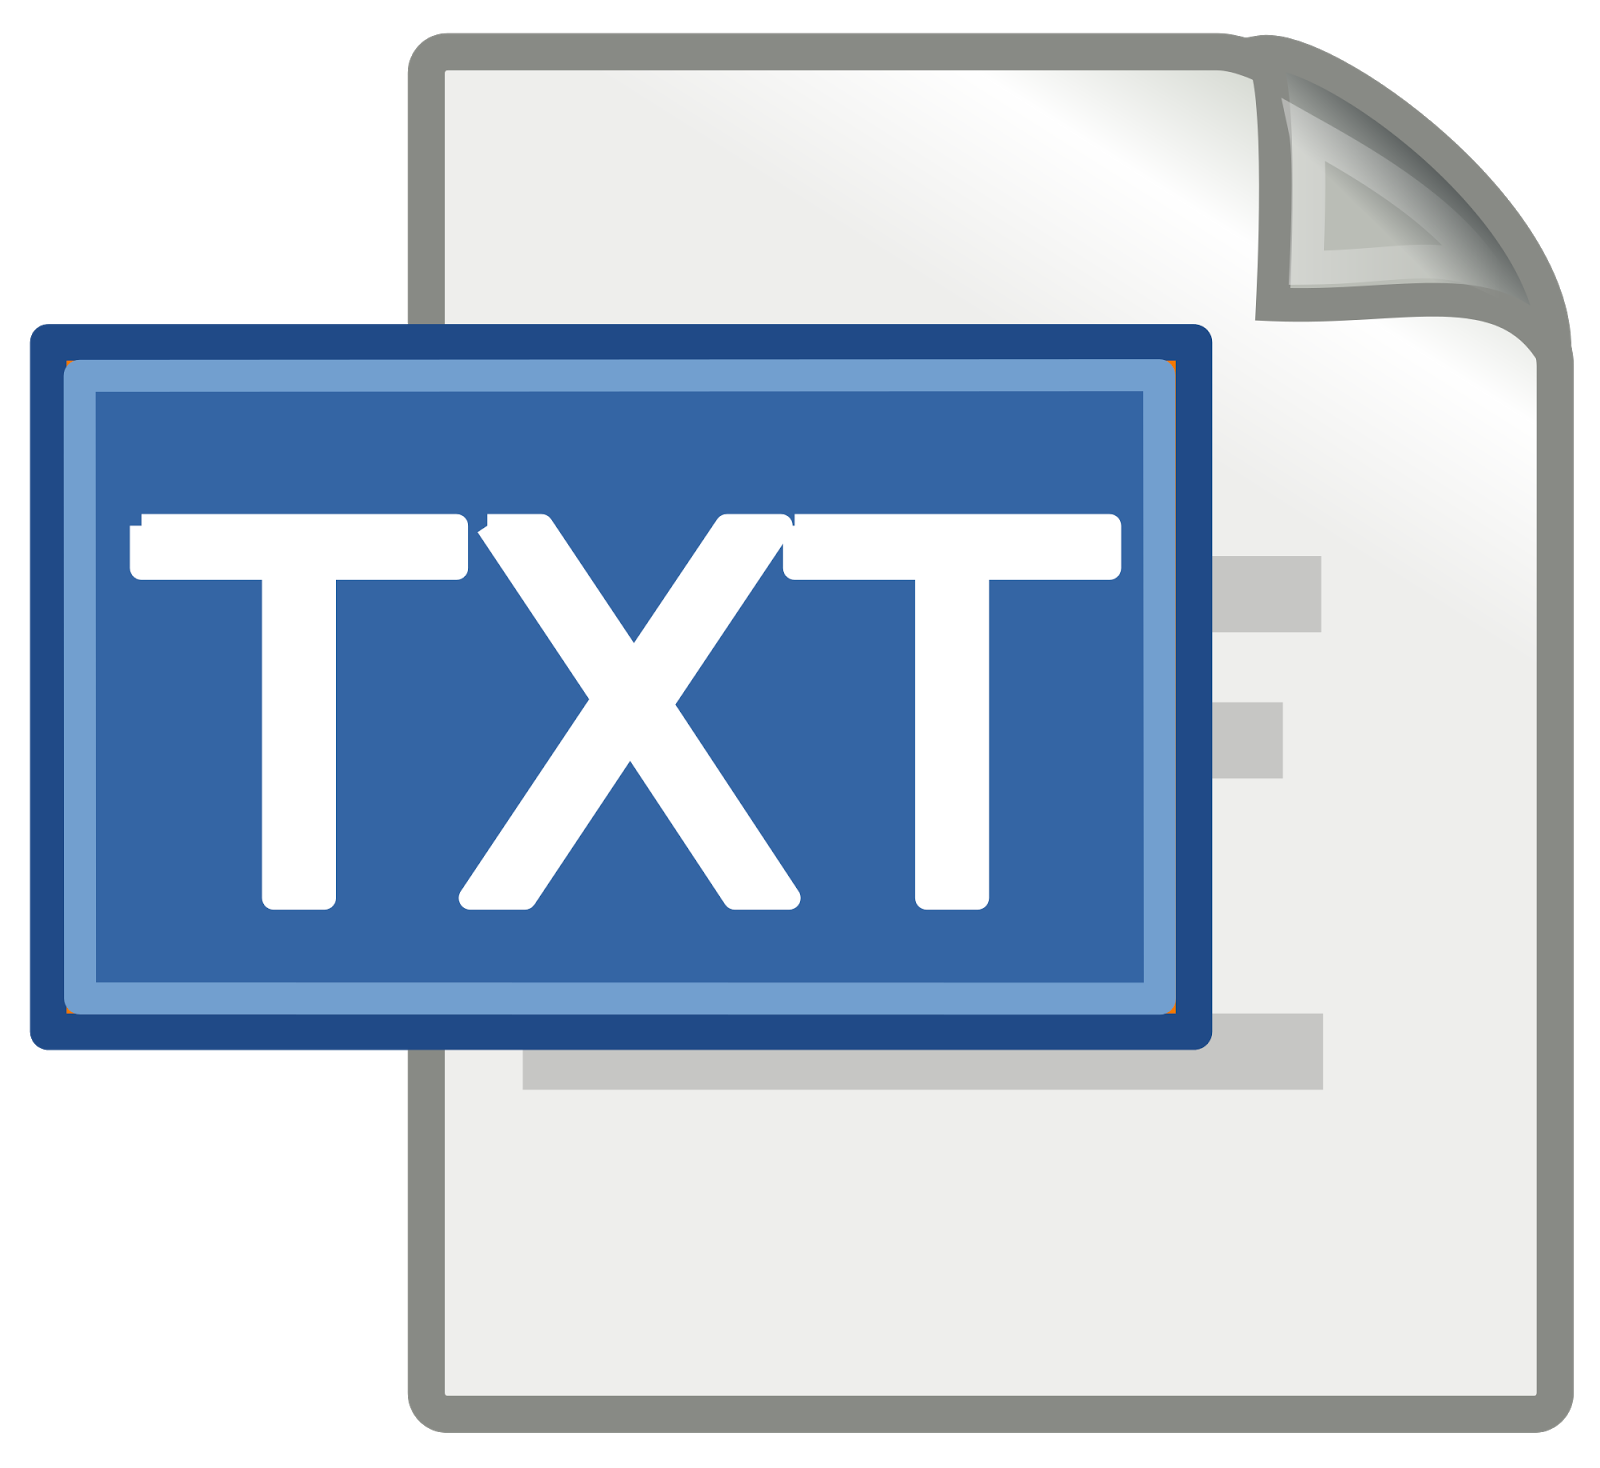 How to write to text file using java